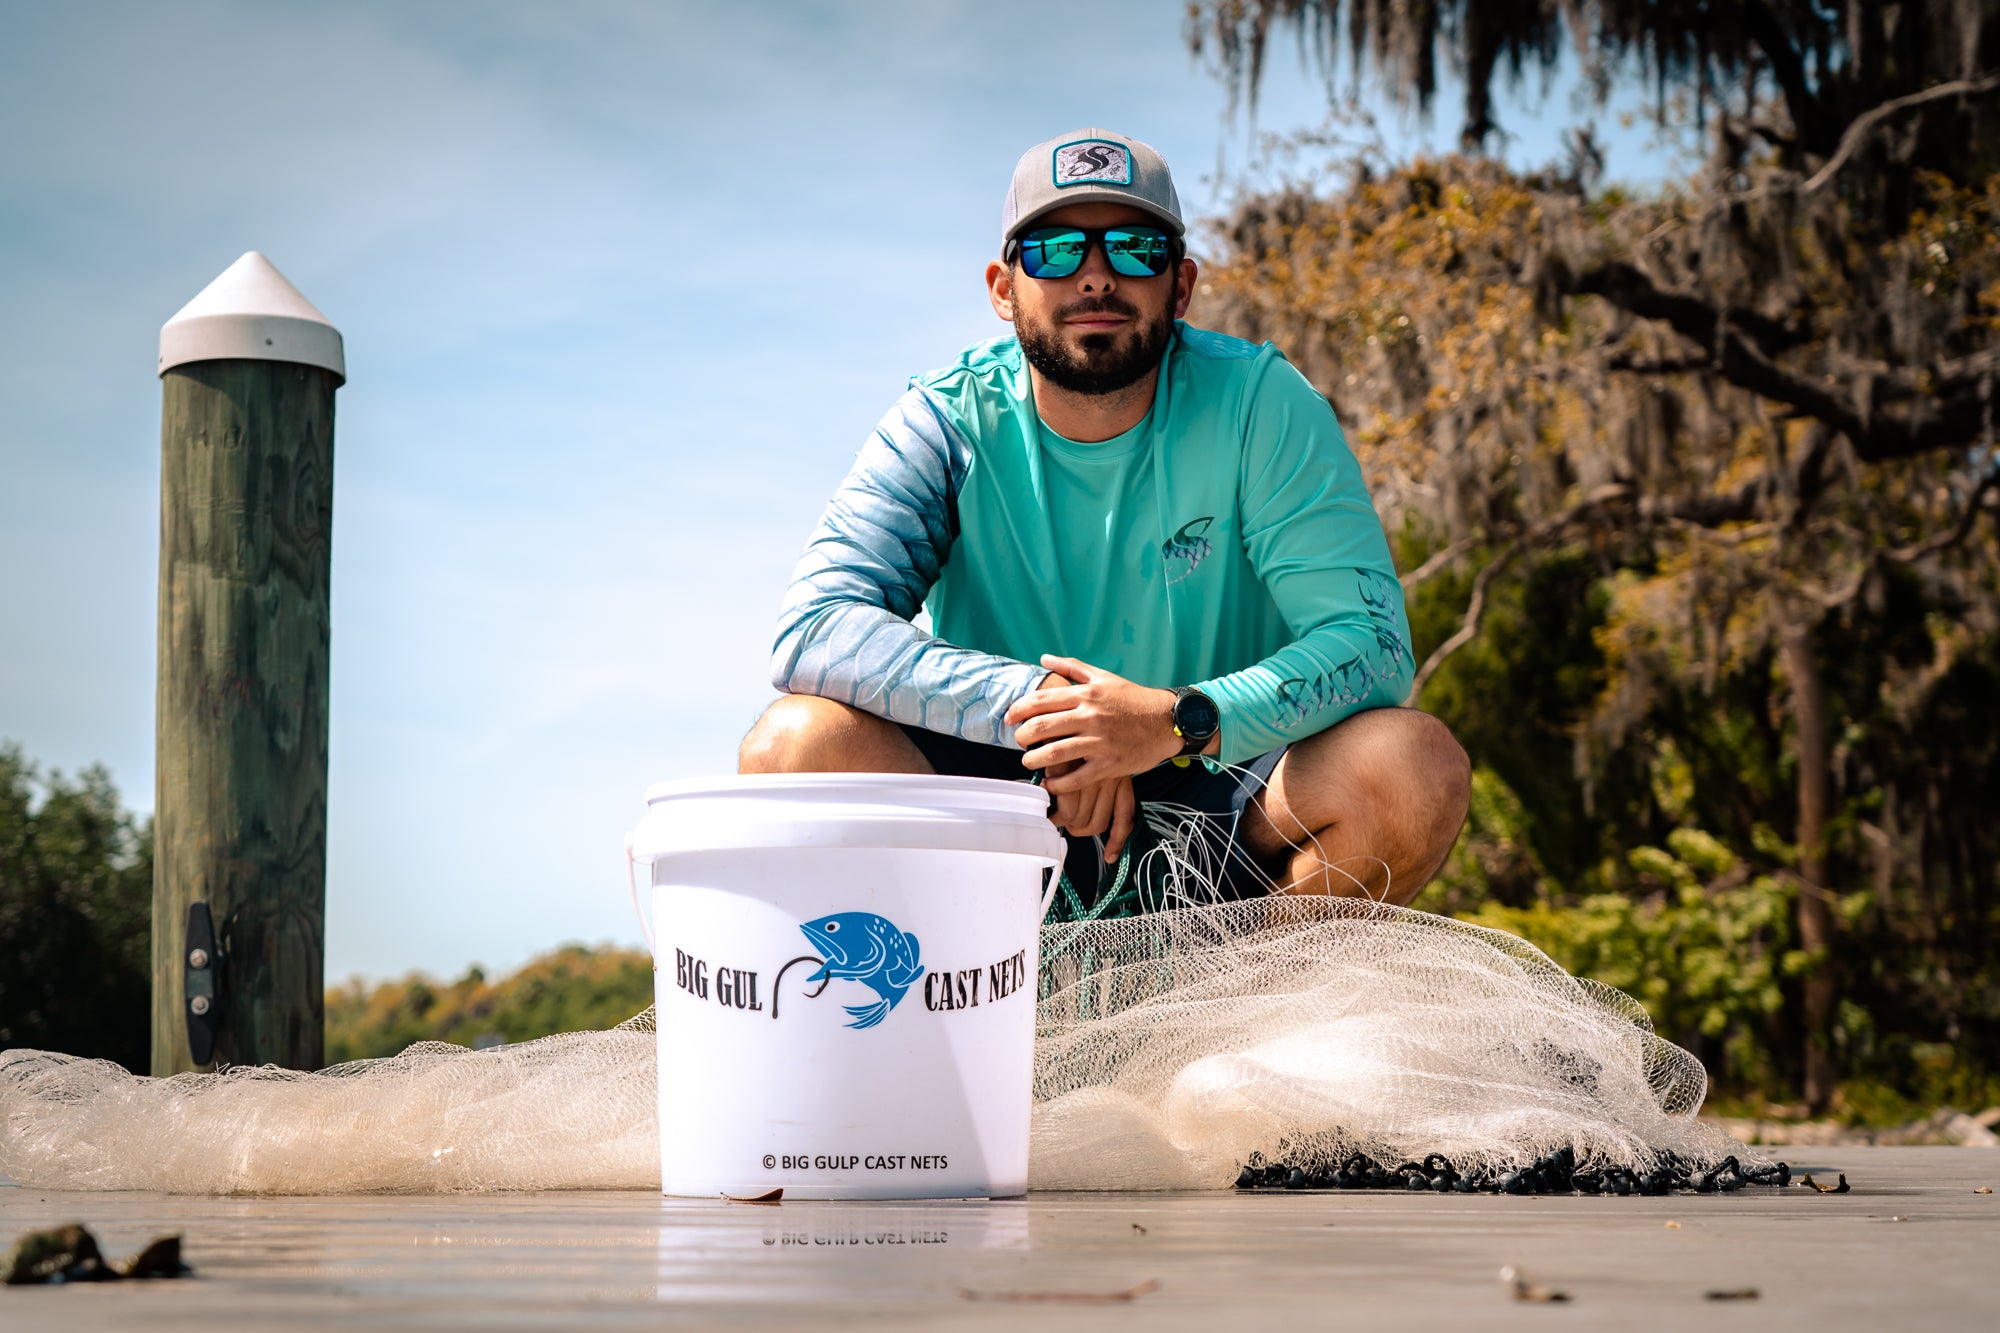 How To Catch Pinfish For Bait Without A Net Or Trap [Video Tutorial] » Salt  Strong Fishing Club